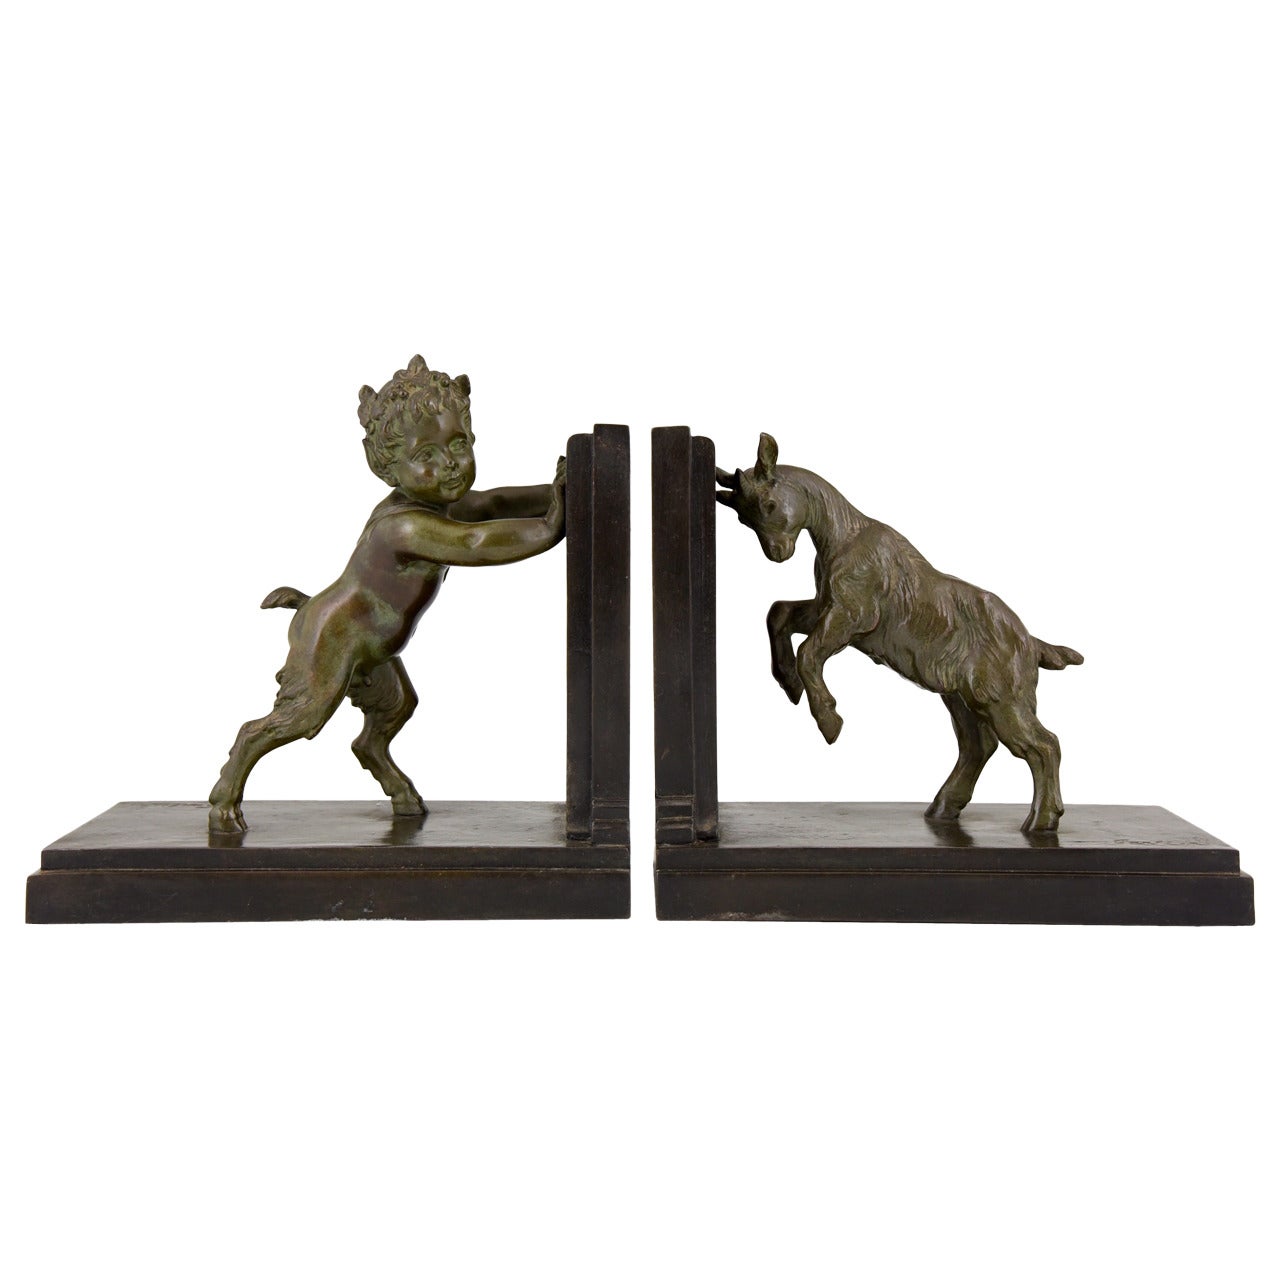 French Art Deco Sculpture Bookends Satyr and Goat by Carlier, 1930